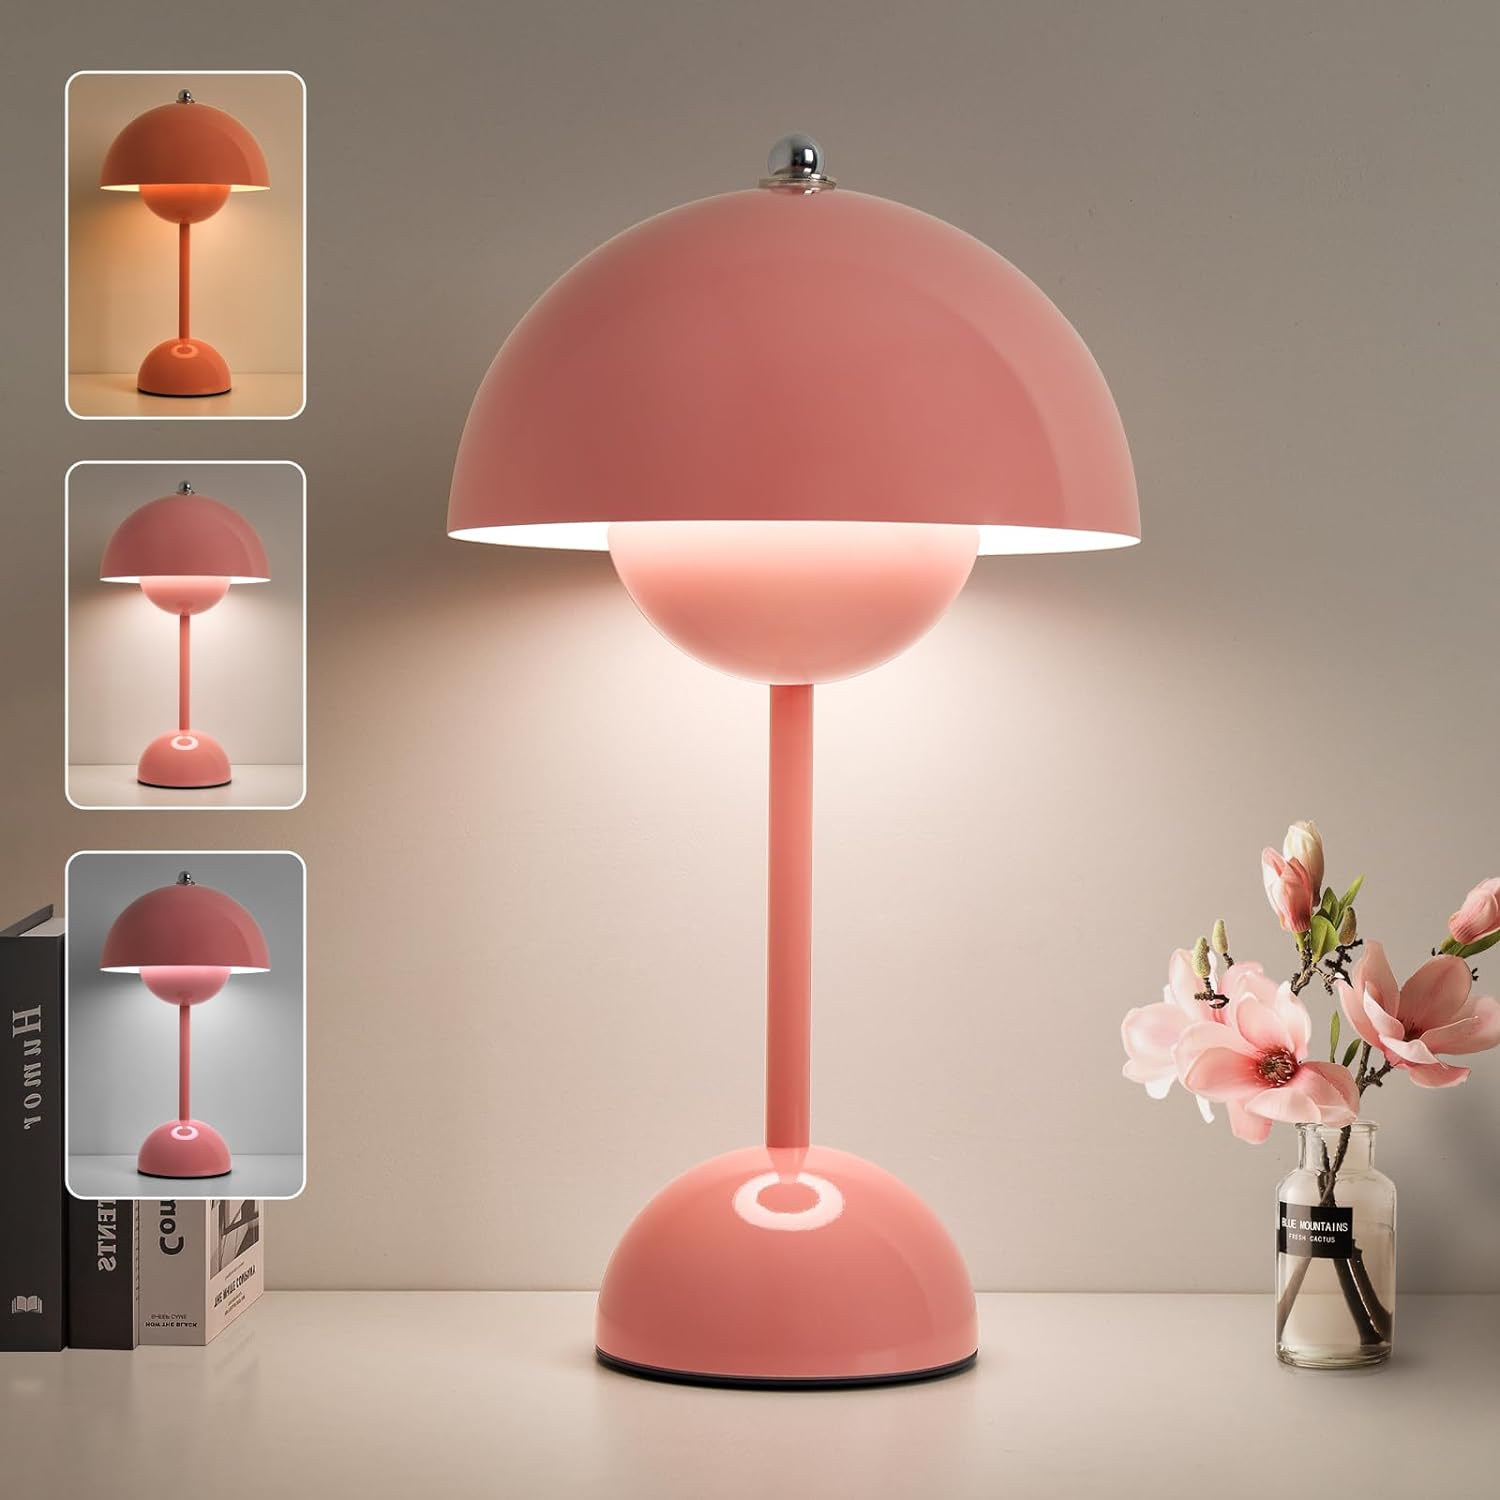 Modern Flowerpot Cordless Table Lamp,2600mAh Rechargeable Battery Operated Mushroom Light,3 Color Stepless Dimmable Up,12 Portable Bedside LED Desk Lamp,Perfect for Bedroom/Restaurant(Pink)